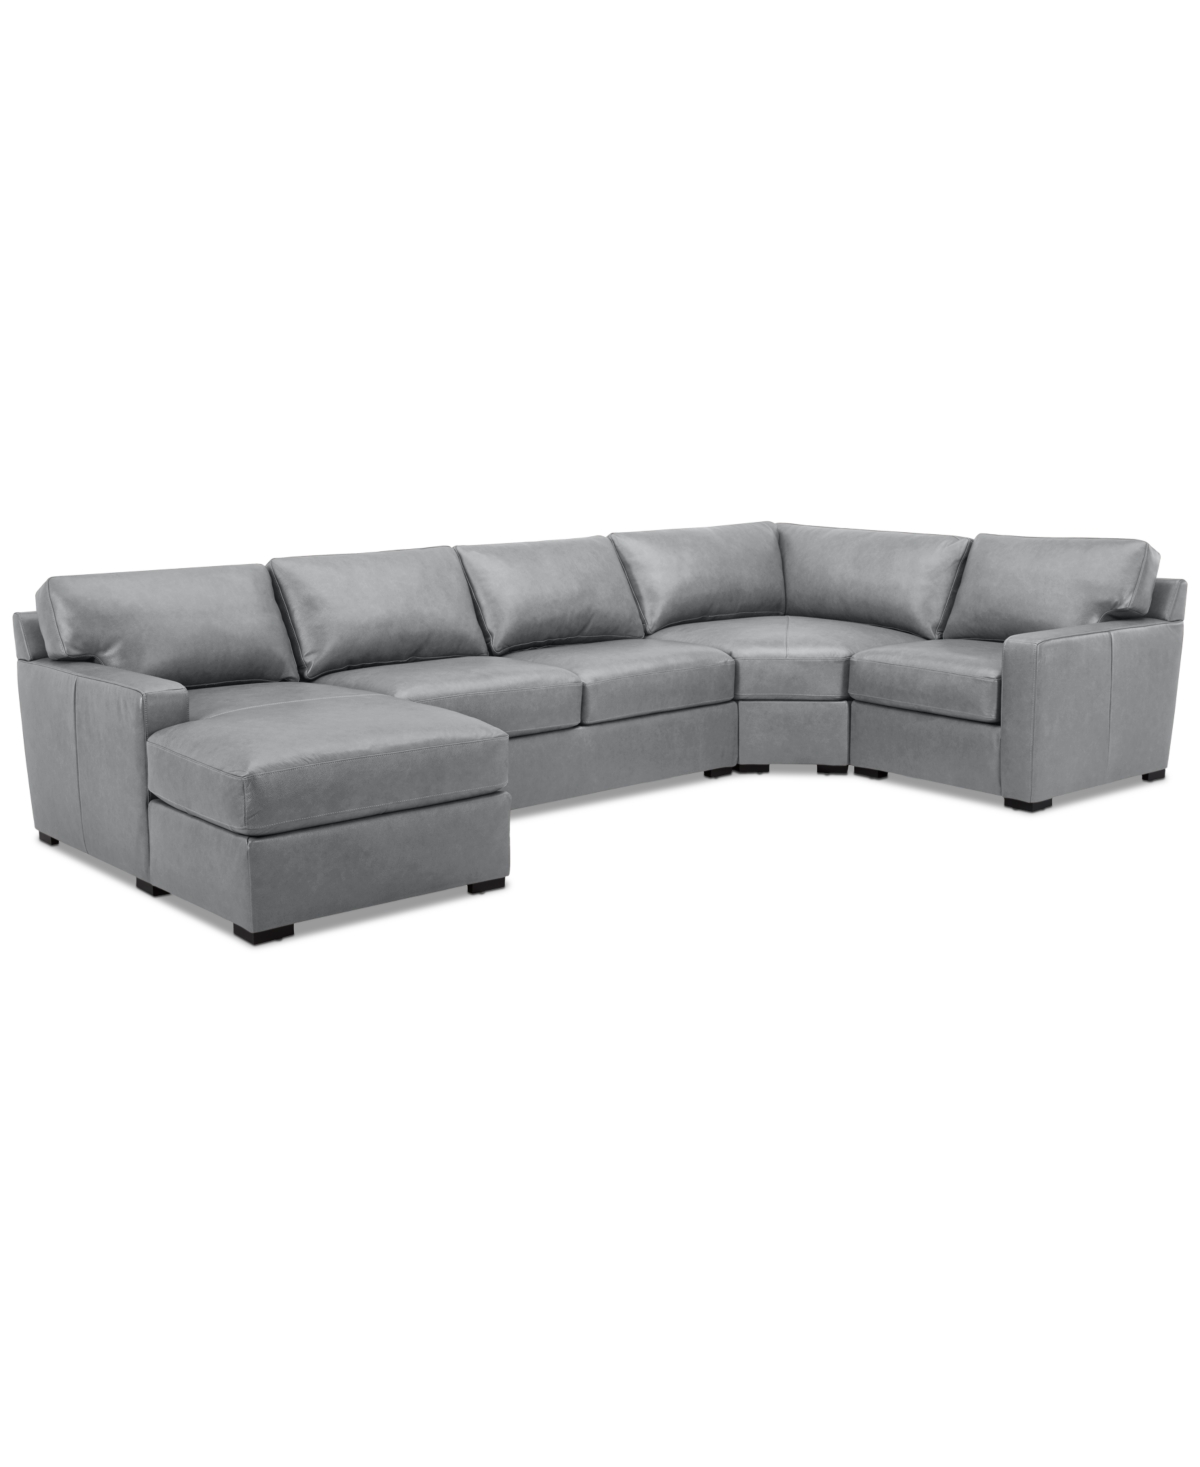 Macy's Radley 148" 4-pc. Leather Wedge Modular Chaise Sectional, Created For  In Light Grey